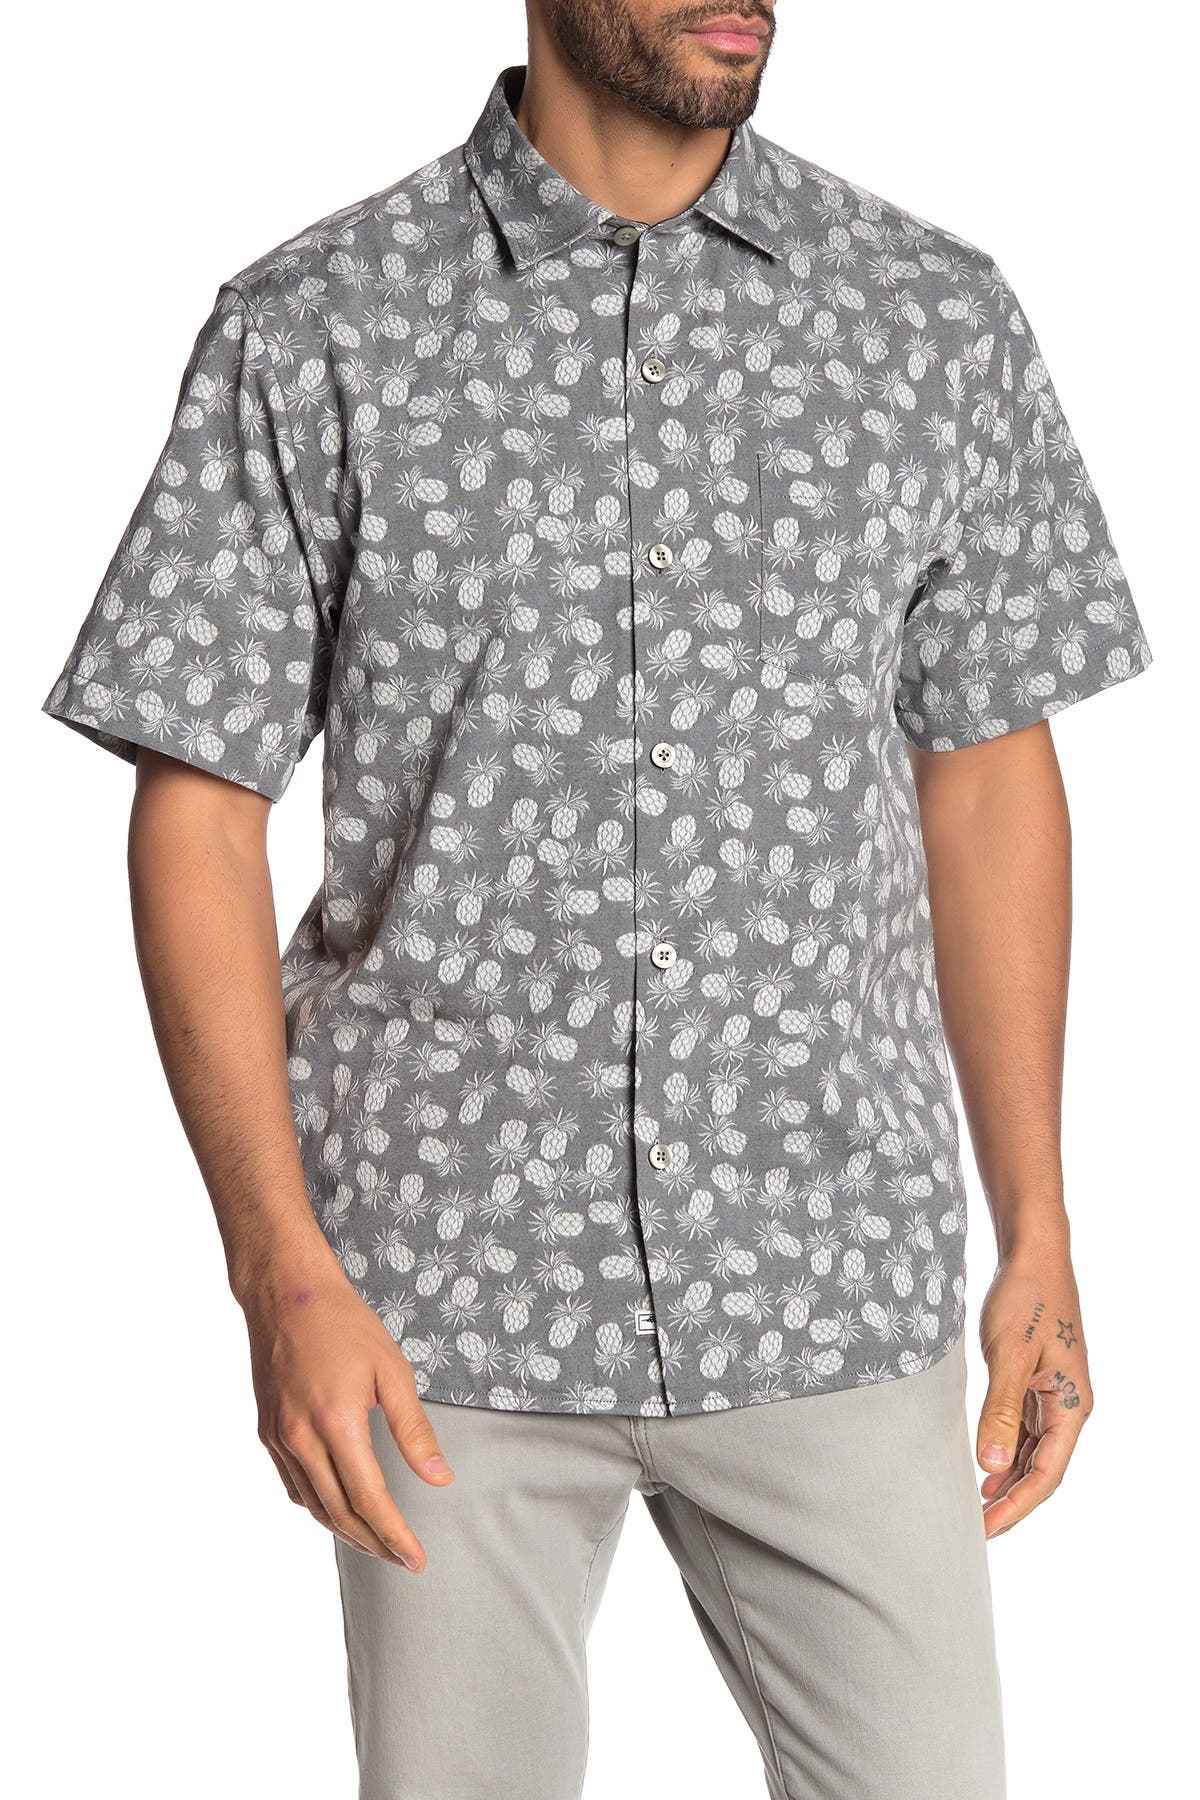 tommy bahama button down